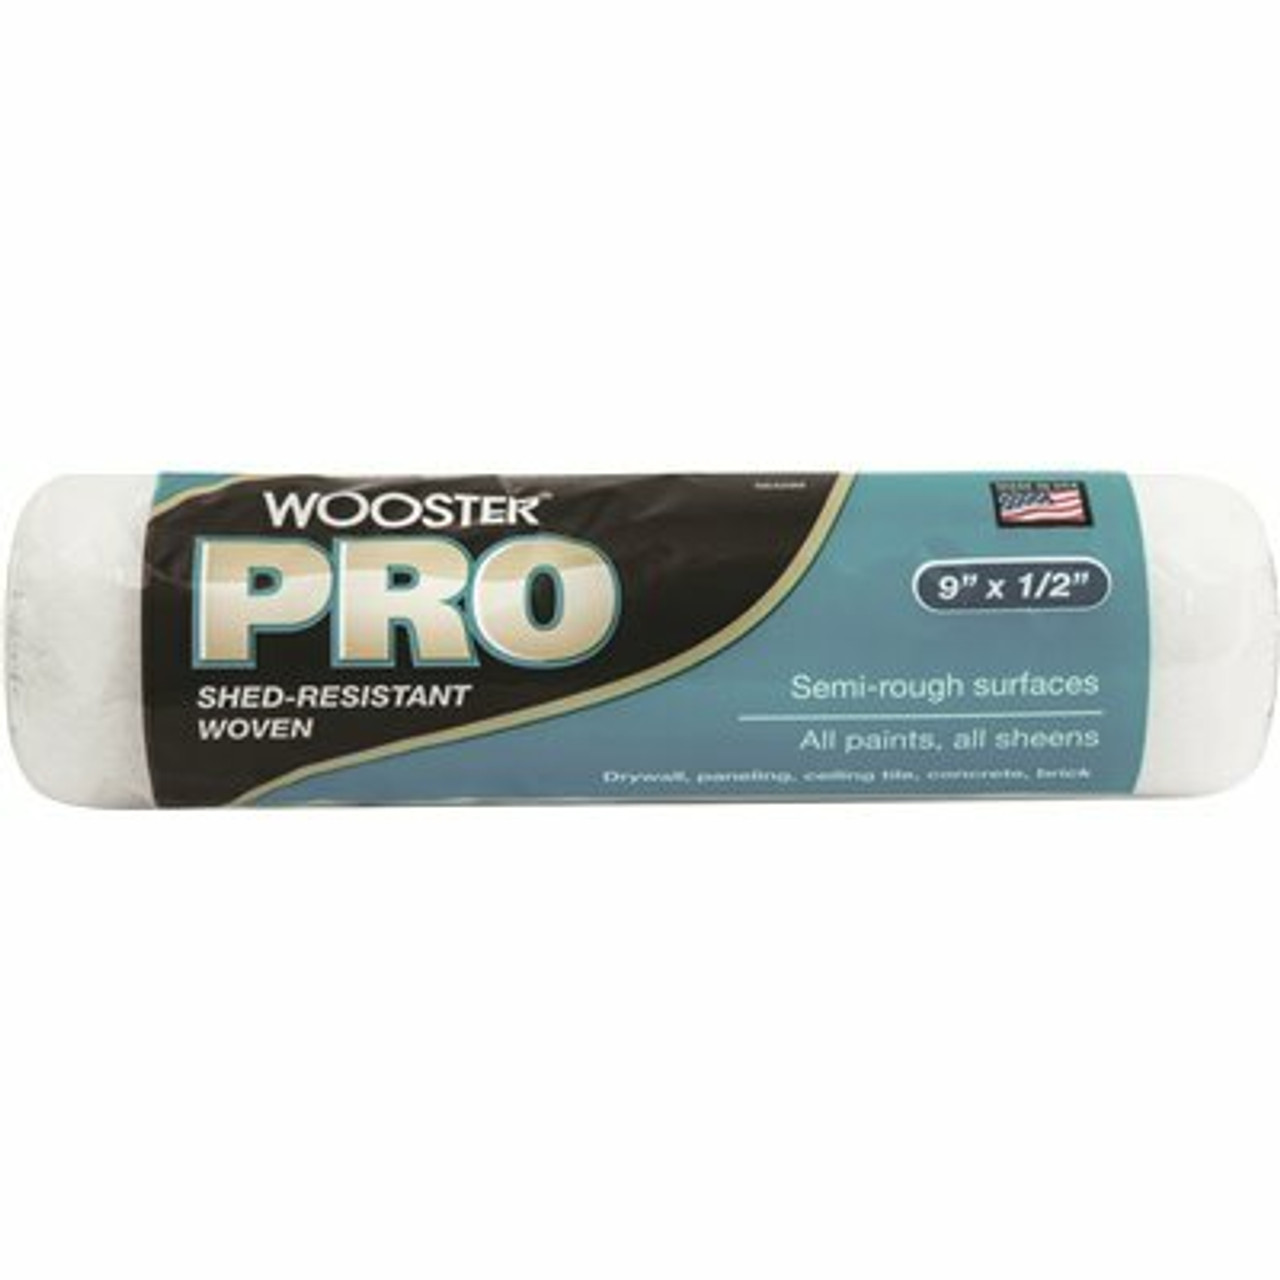 Wooster 9 In. X 1/2 In. High-Density Pro Woven Roller Cover